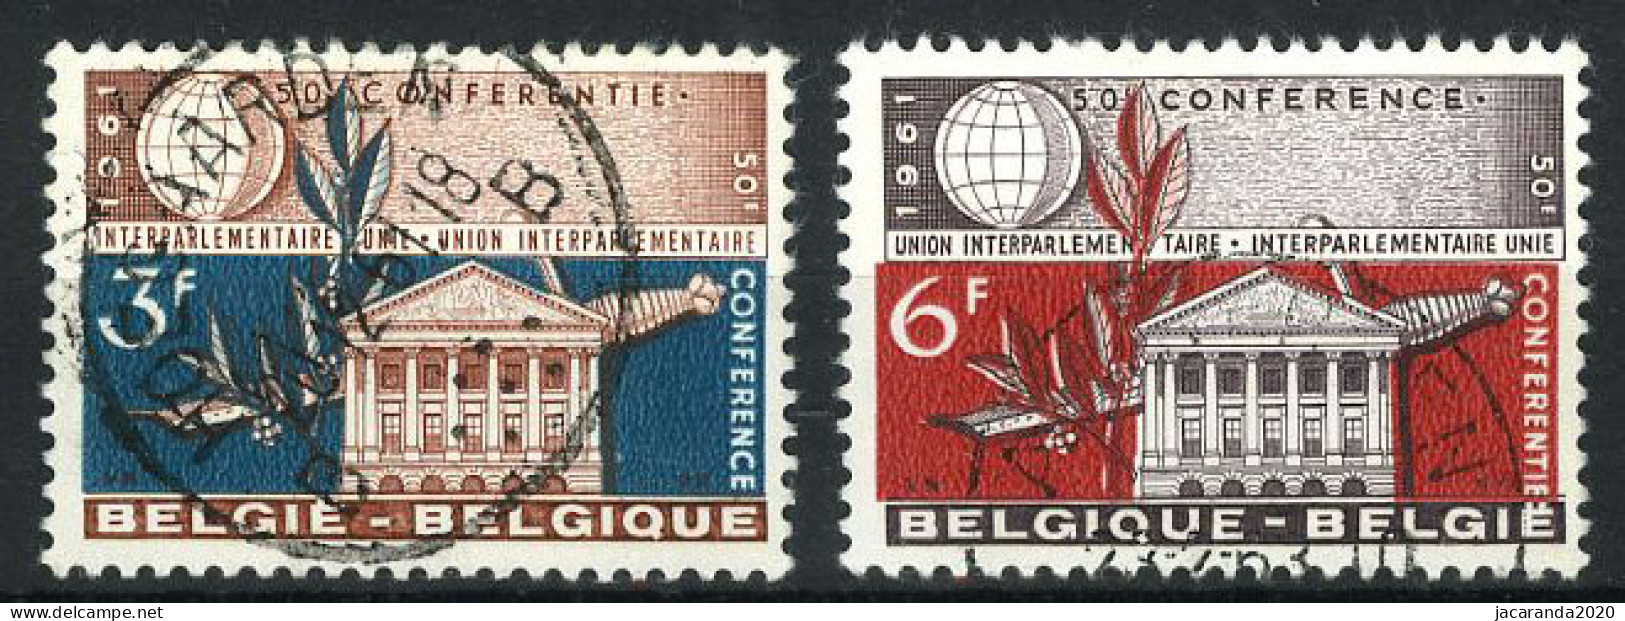 België 1191/92 - Interparlementaire Unie - Gestempeld - Oblitéré - Used - Used Stamps